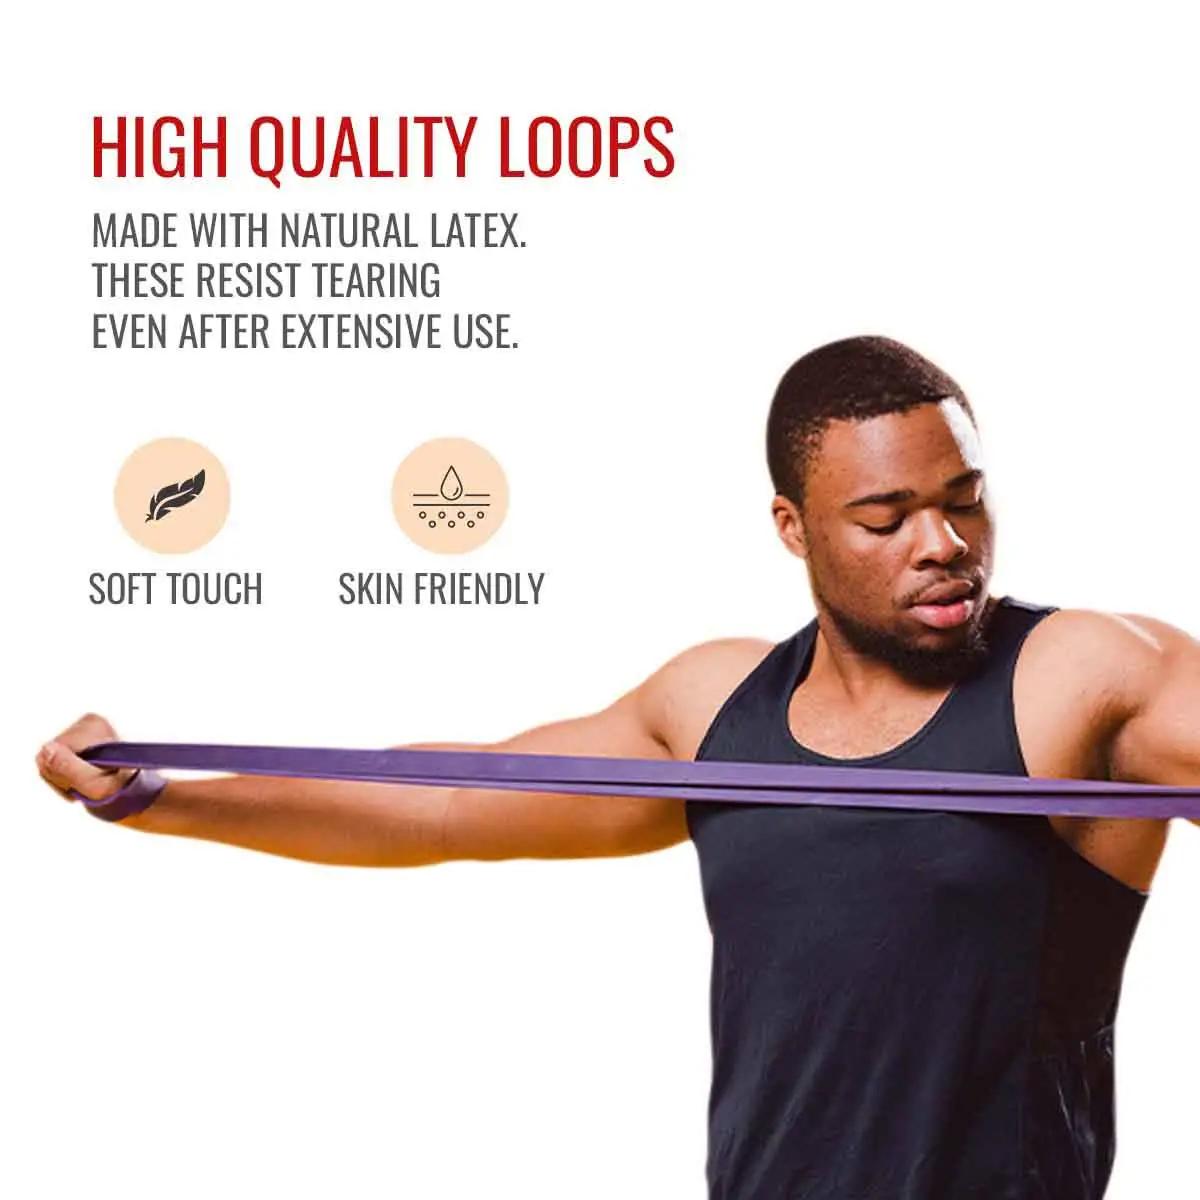 Durafit Resistance Band Orlb2 High Quality Loops